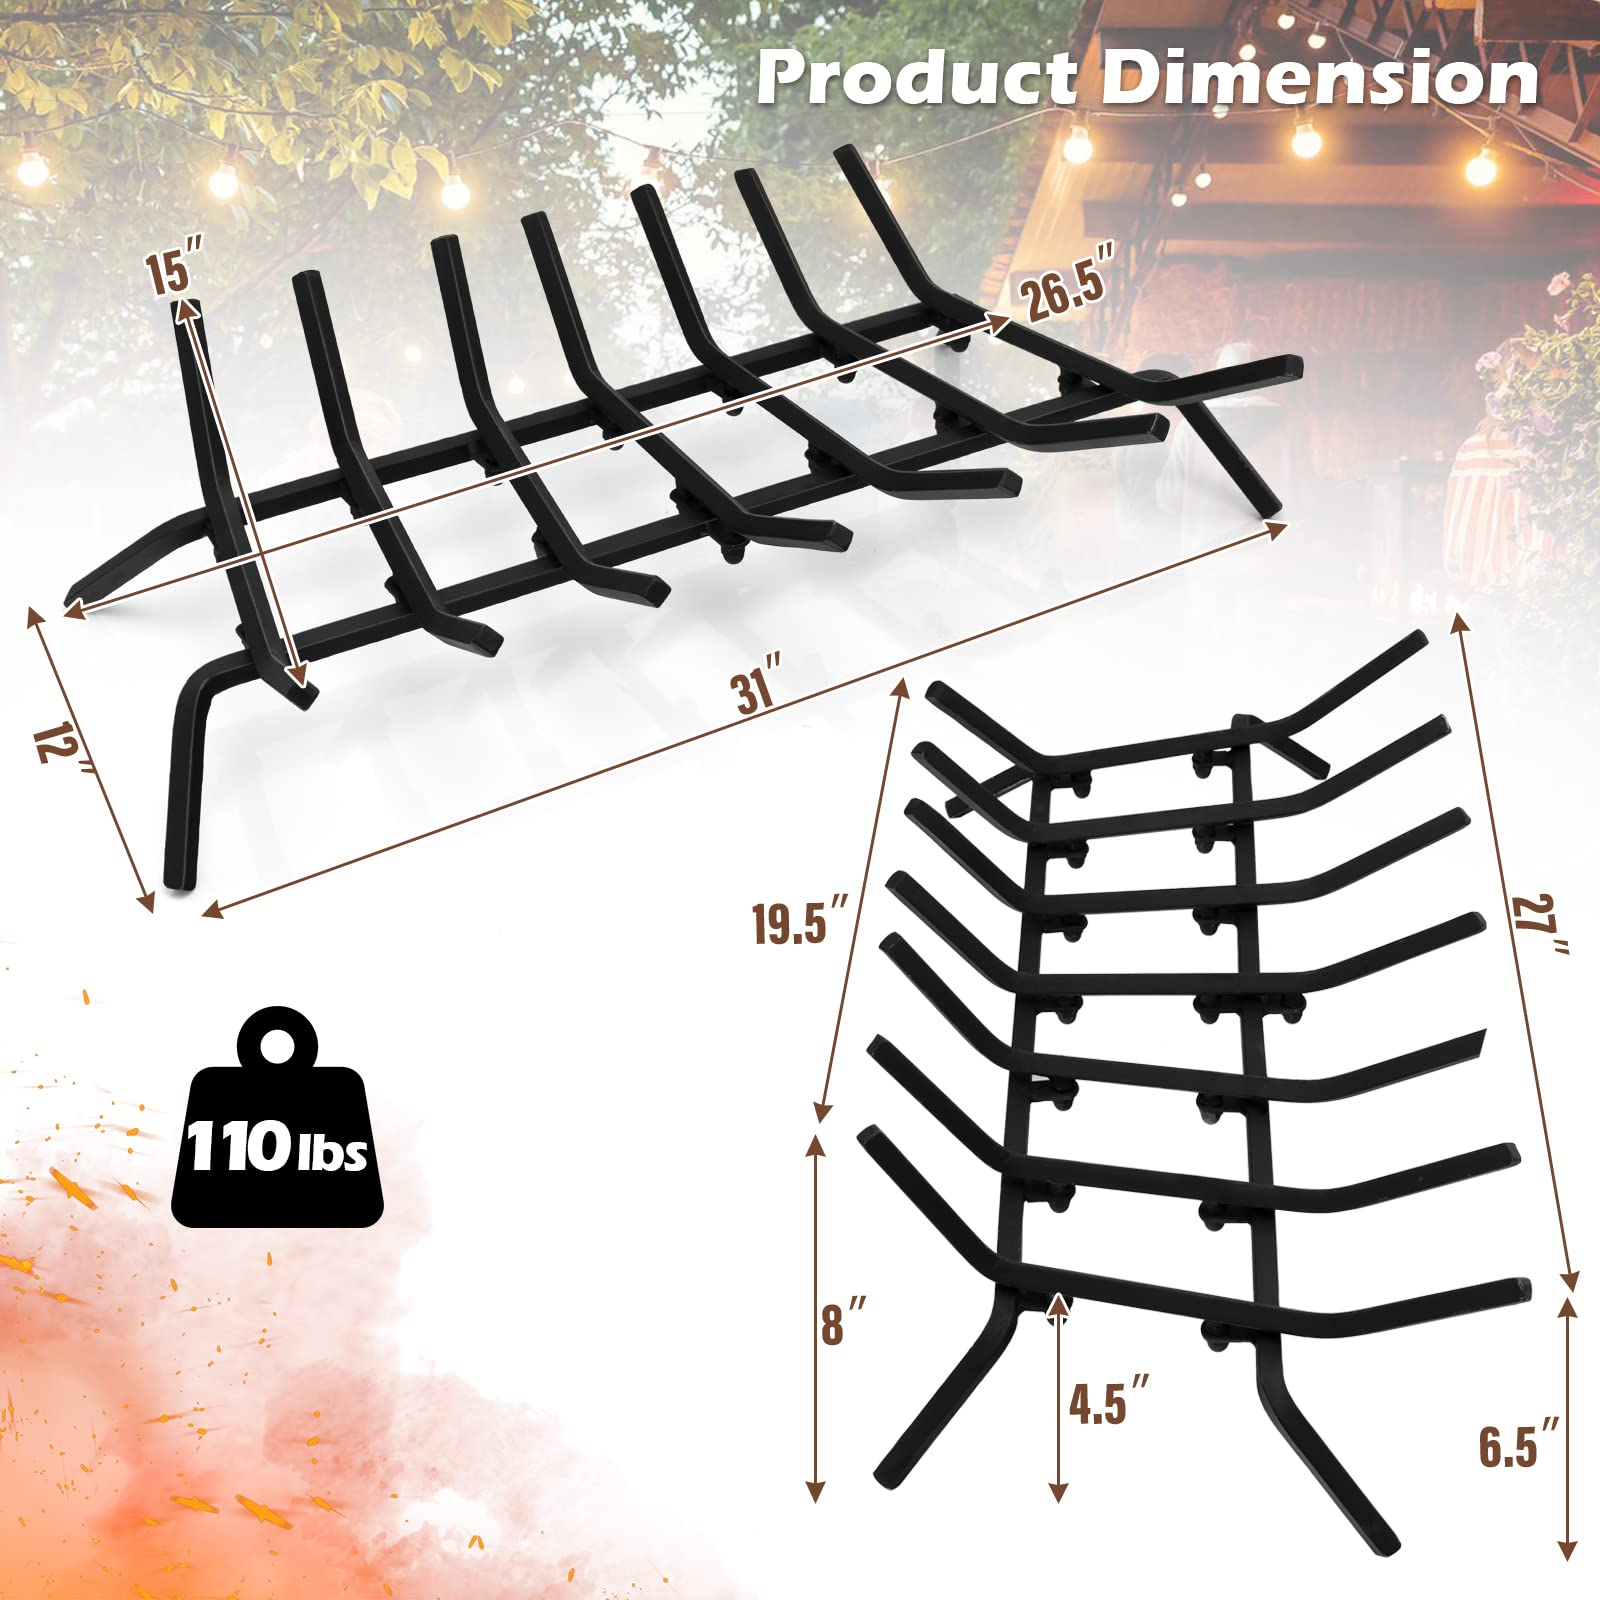 Goplus 31 Inch Fireplace Log Grate, Heavy Duty Steel Fireplace Log Holder with 3/4 Wide Solid Bars for Outdoor Kindling Tools Pit